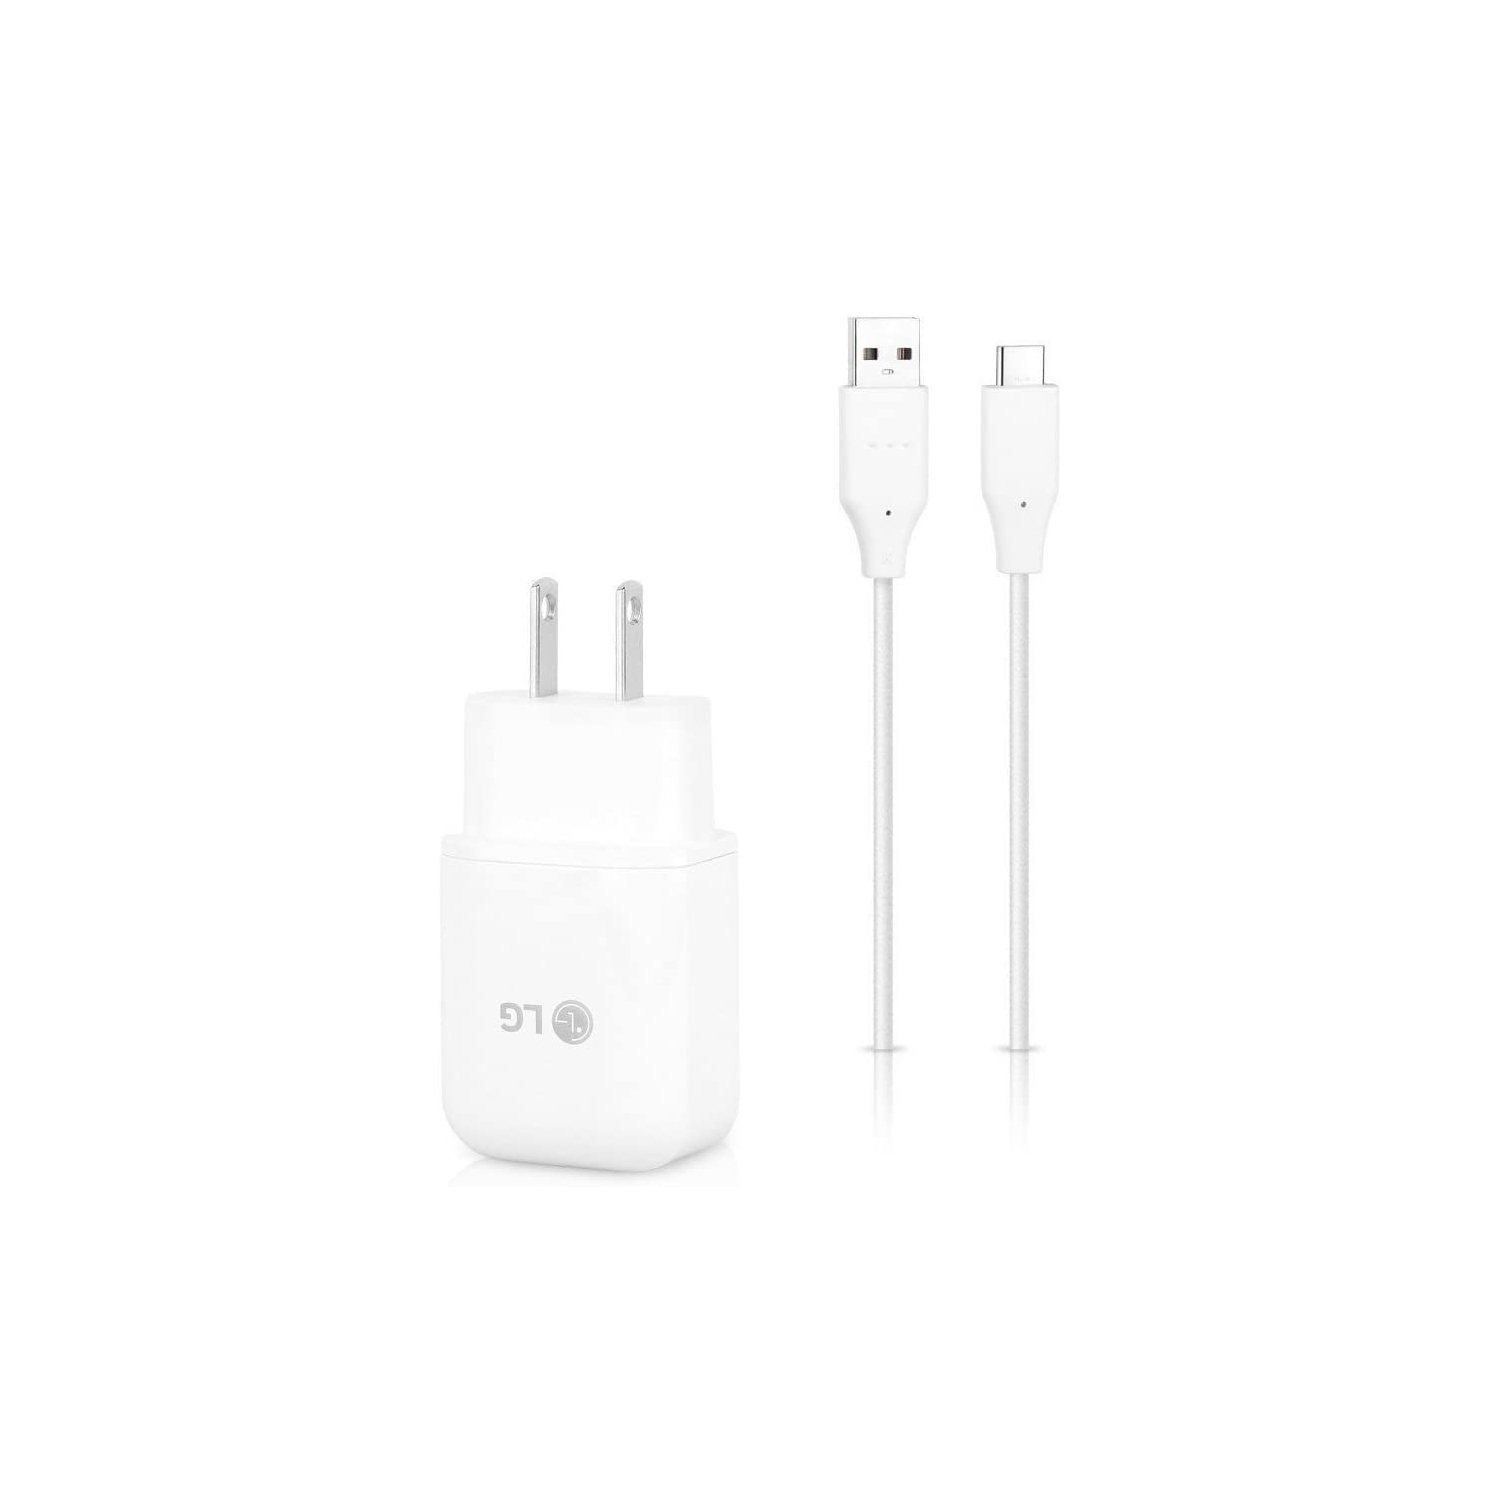 |HWS| (2 Pack) LG Fast Charger with USB C Cable 18W QuickCharge 3.0